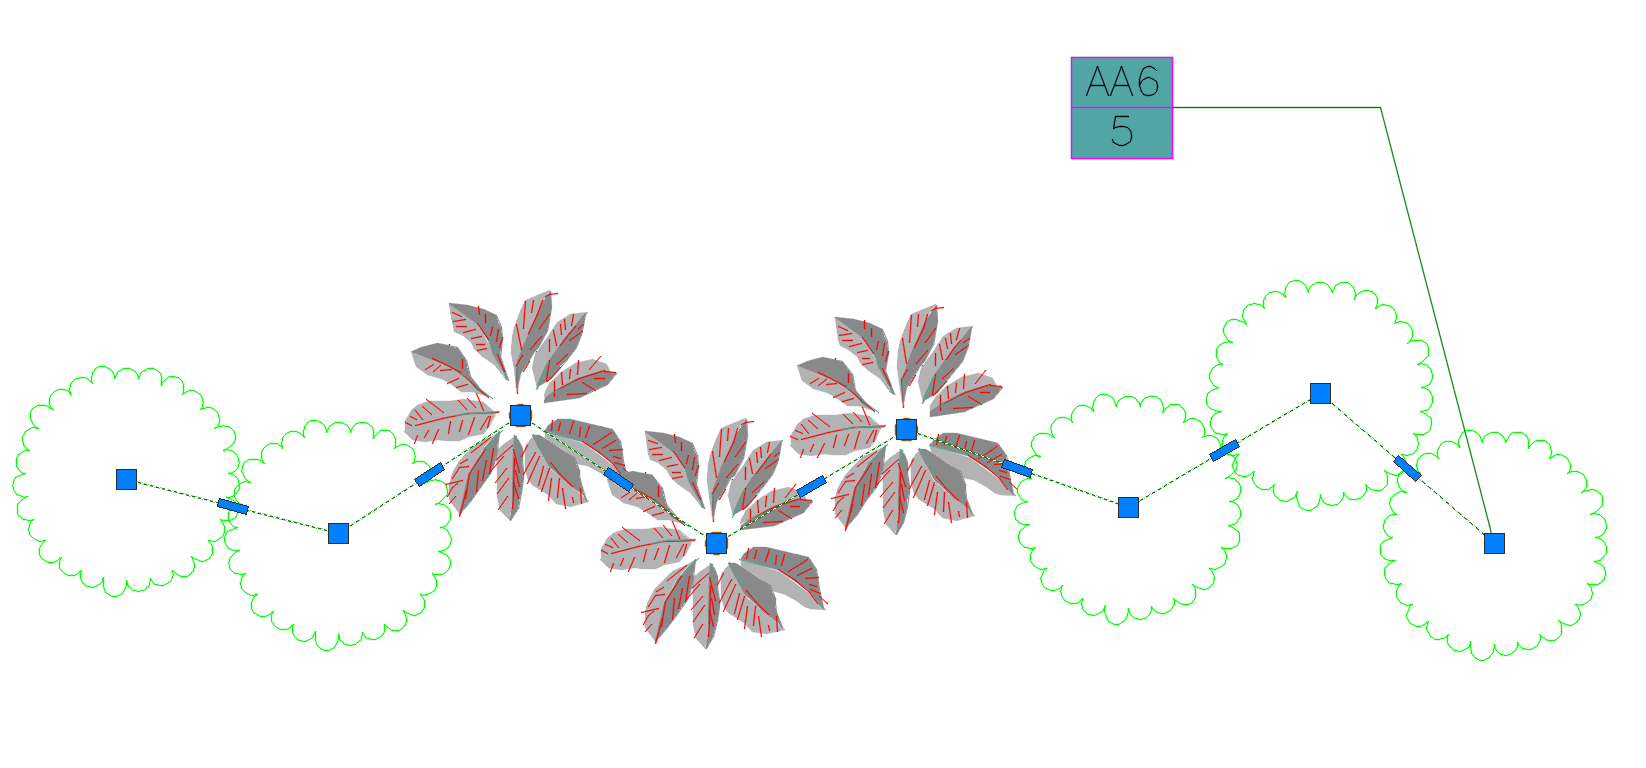 Select polyline connecting plants